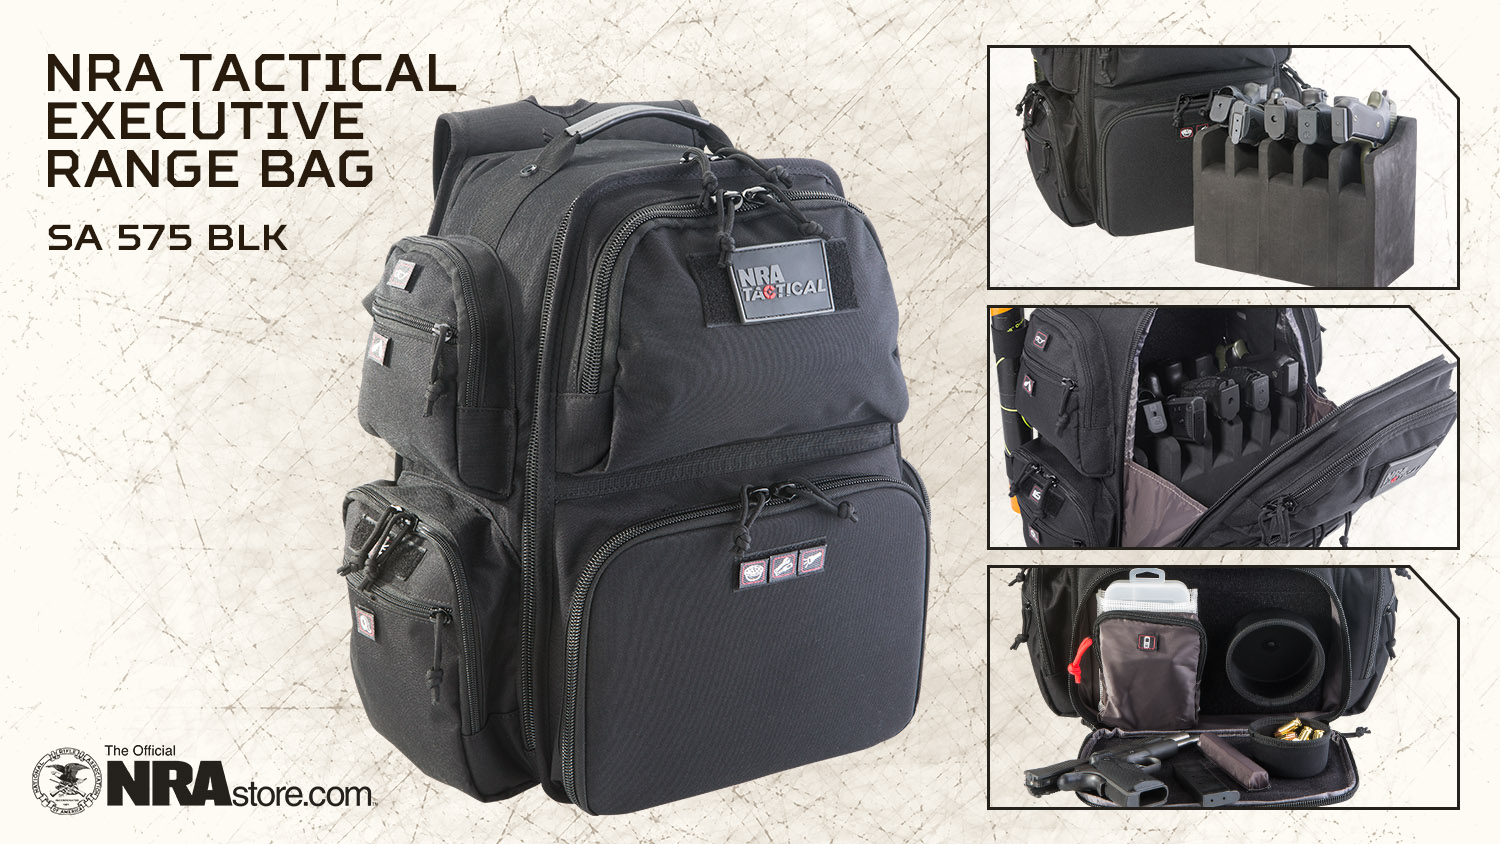 NRA Store Product Highlight: Tactical Executive Range Bag